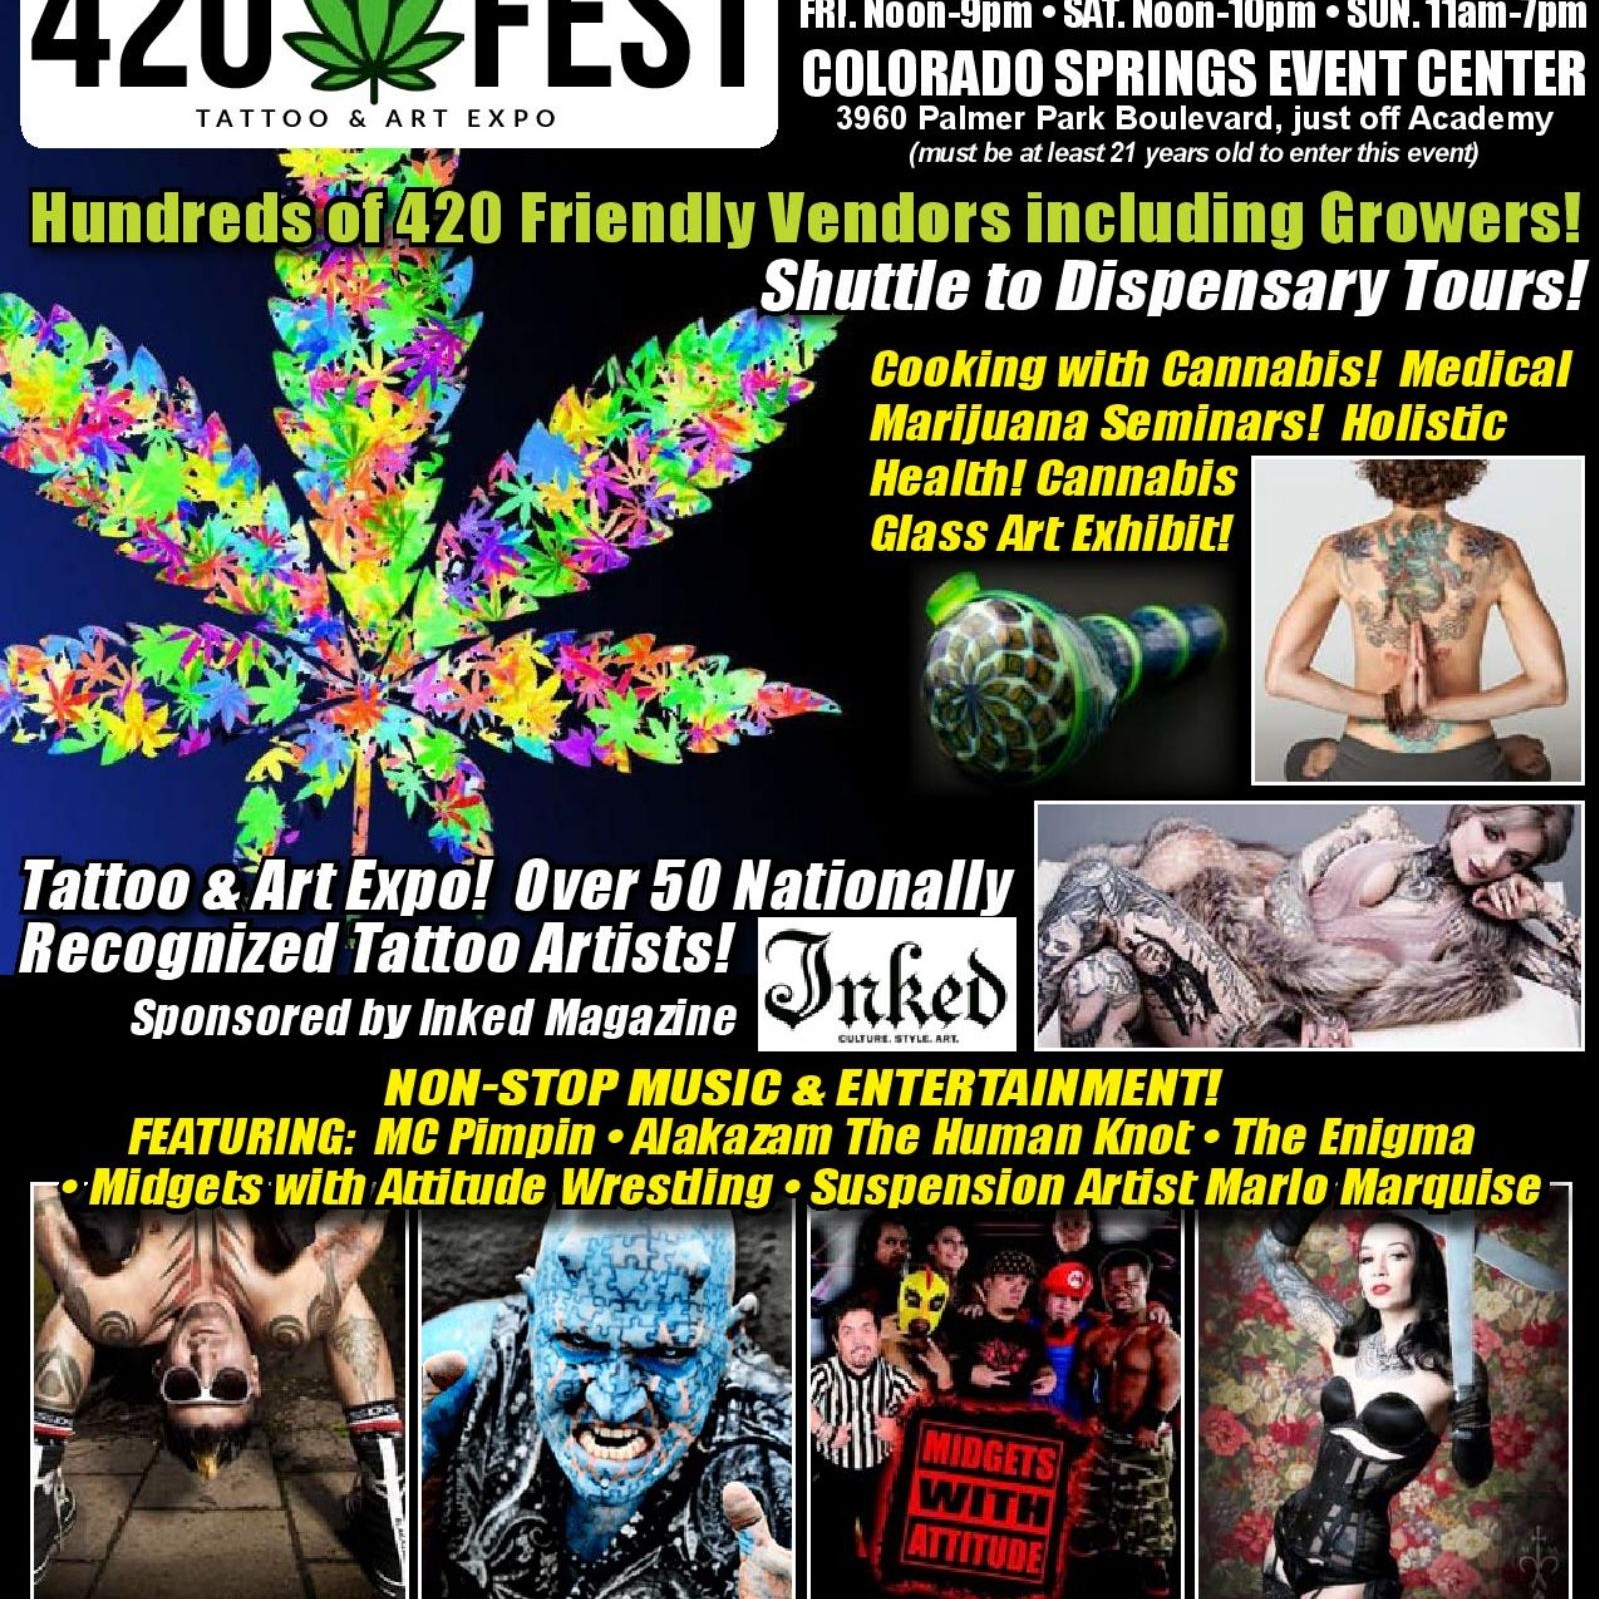 Colorado Springs 420 Fest, Tattoo, & Art Expo Tattoo Space Leafly